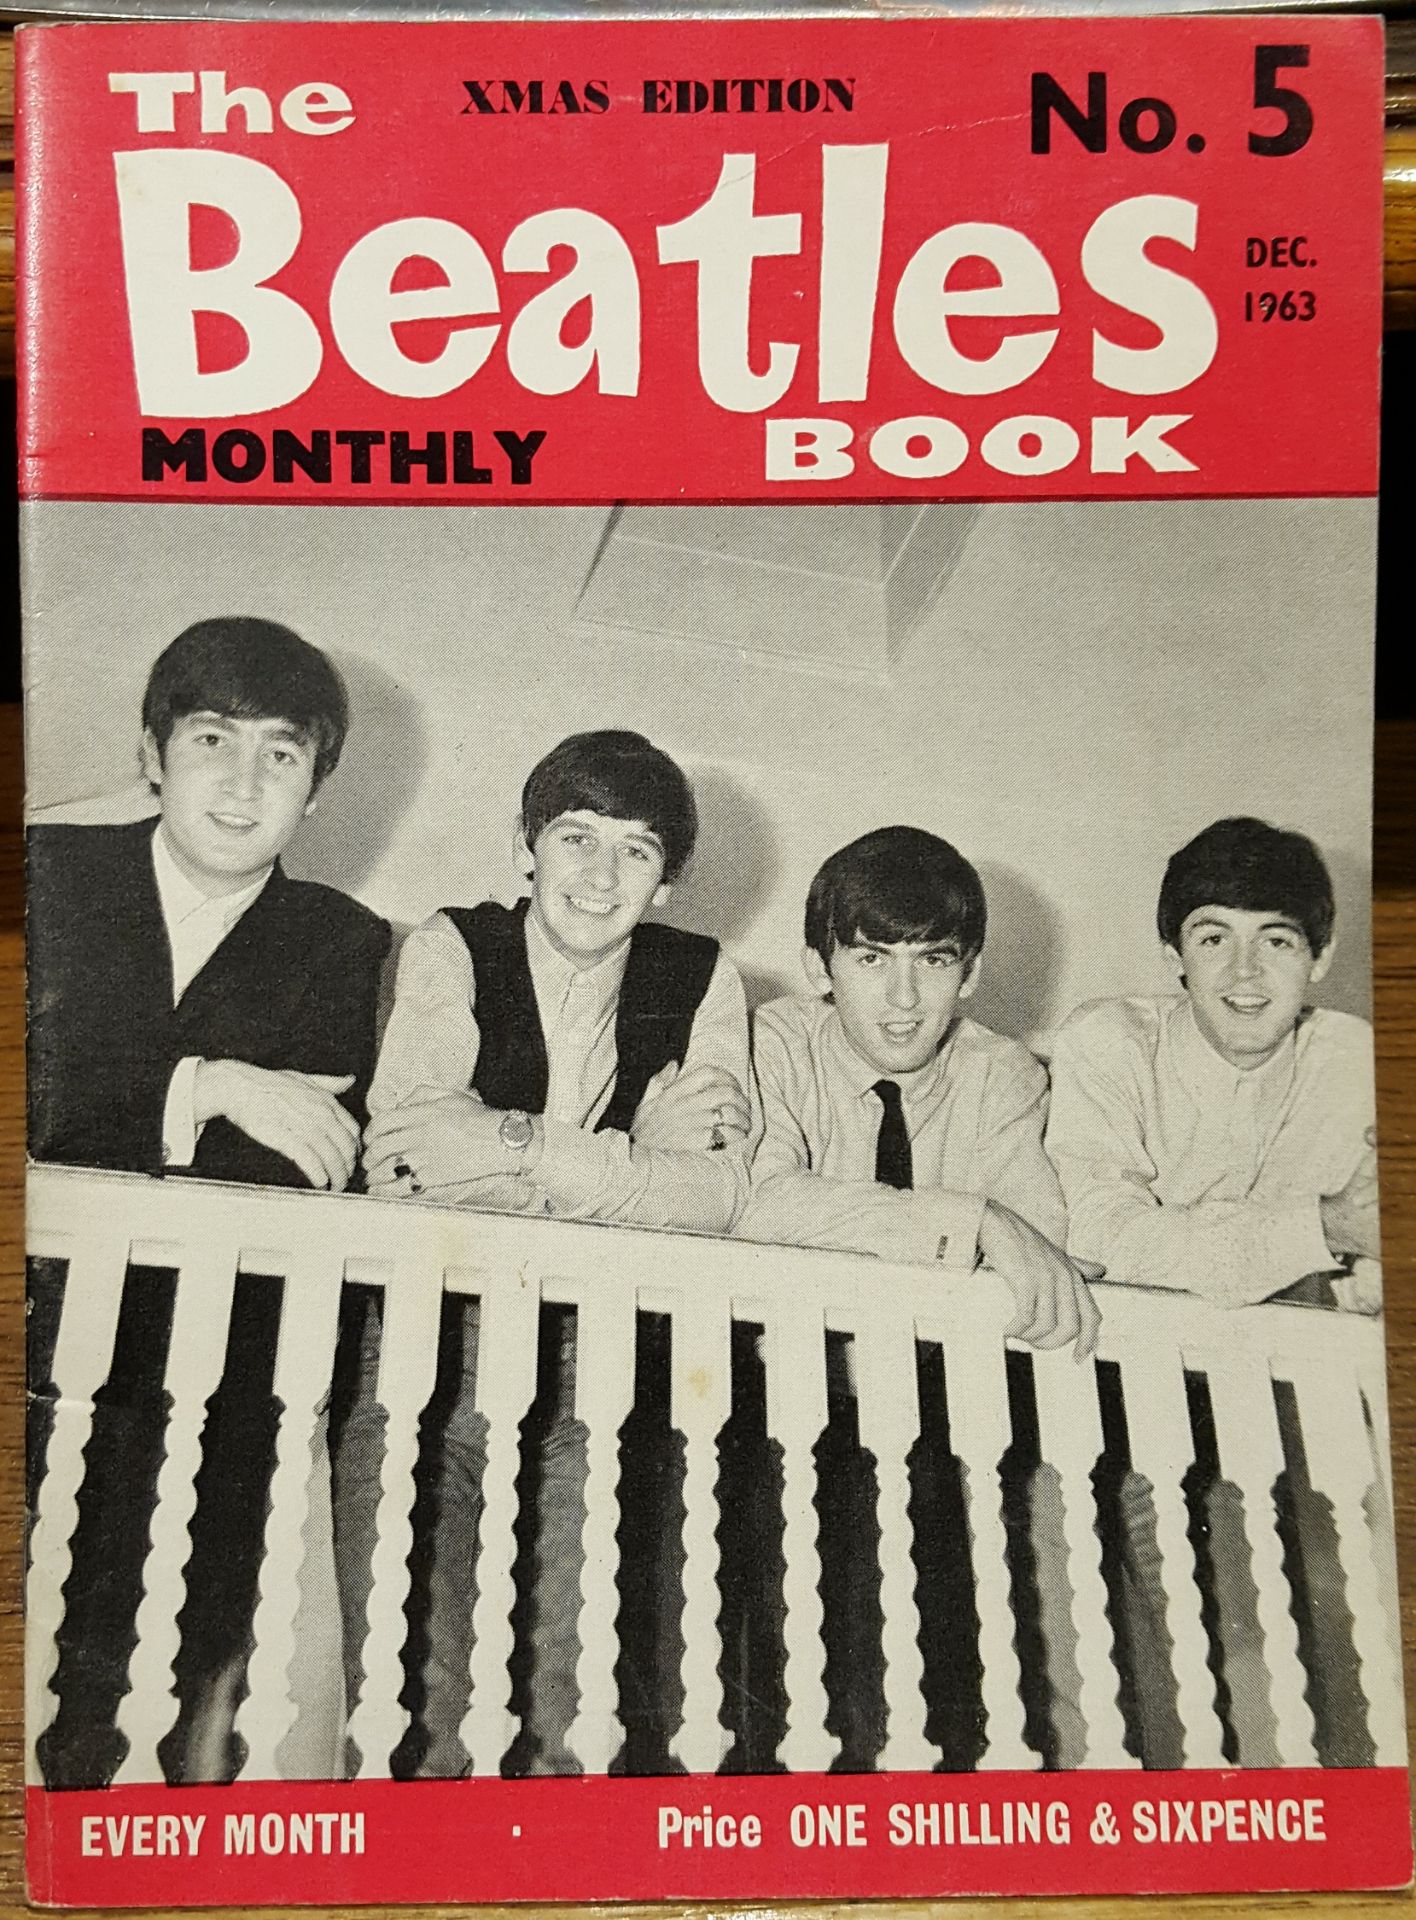 Vintage Retro The Beatles Book Monthly Issues 1 to 8 Aug 1963 - March 1964 - Image 11 of 18